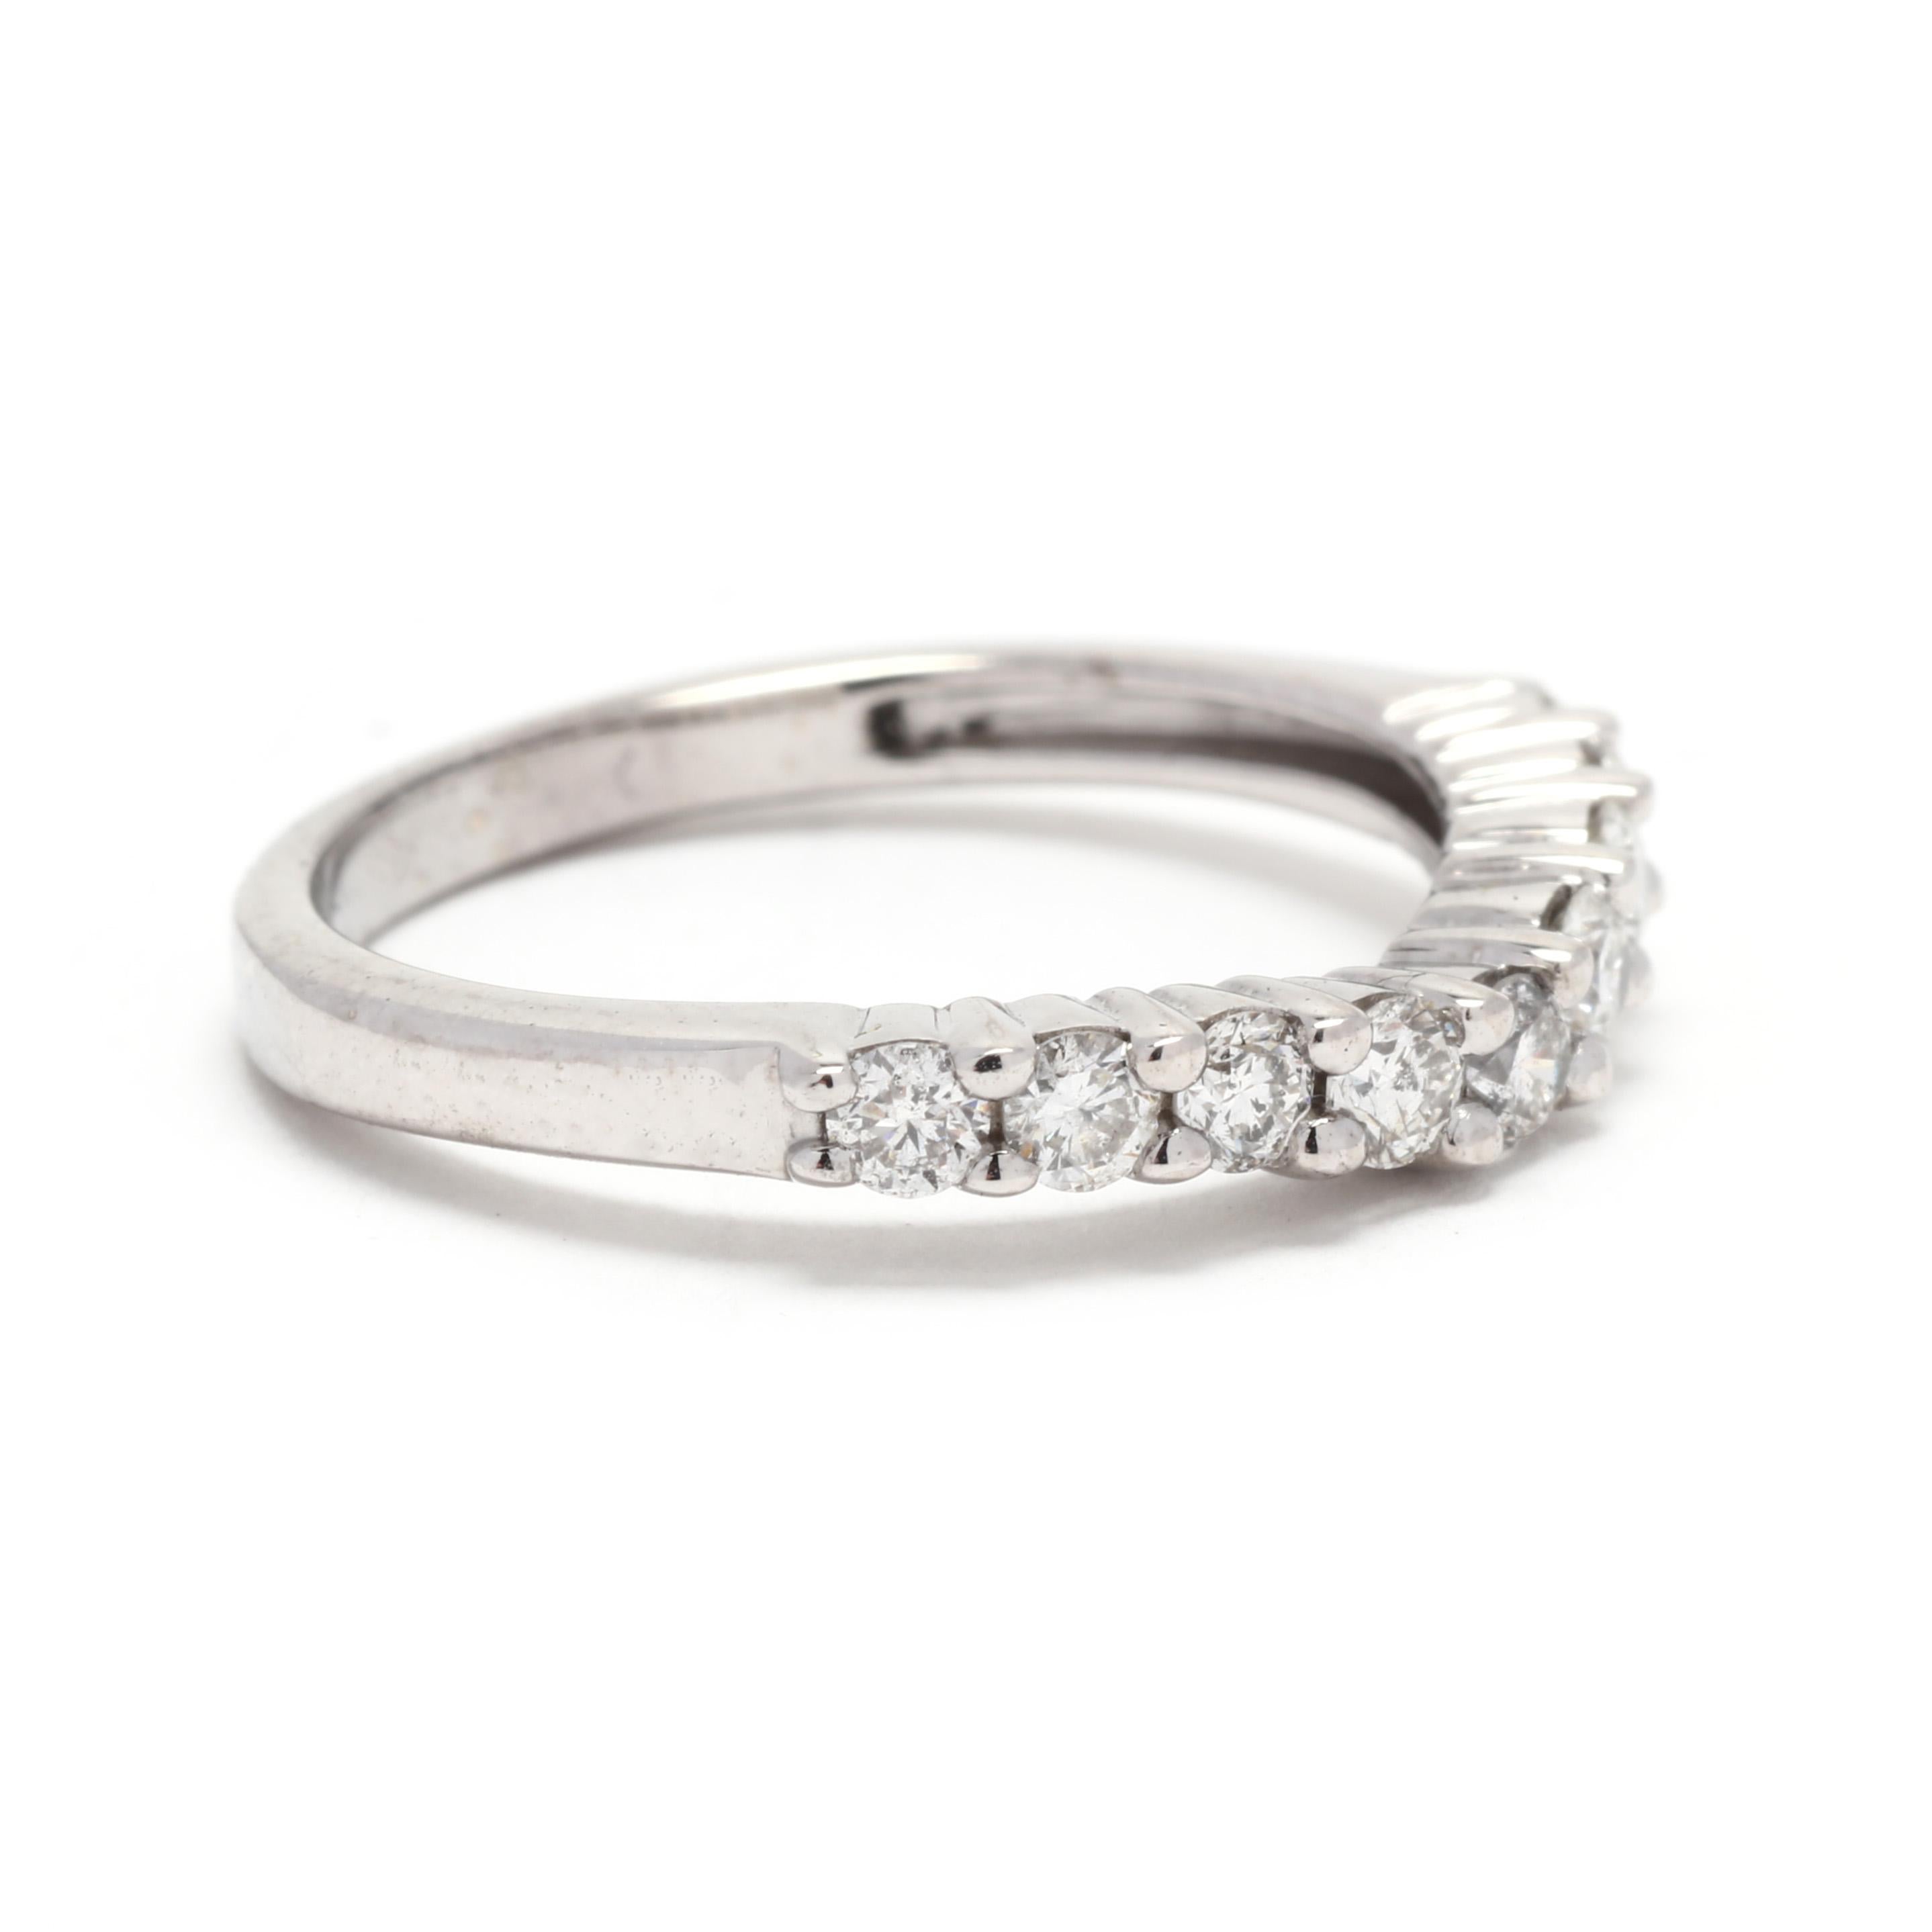 A 14 karat white gold curved diamond wedding band. This stackable band features a curved design with prong set, round brilliant cut diamonds weighing approximately .42 total carats and with a slightly tapered band.

Stones:
- diamonds
- round